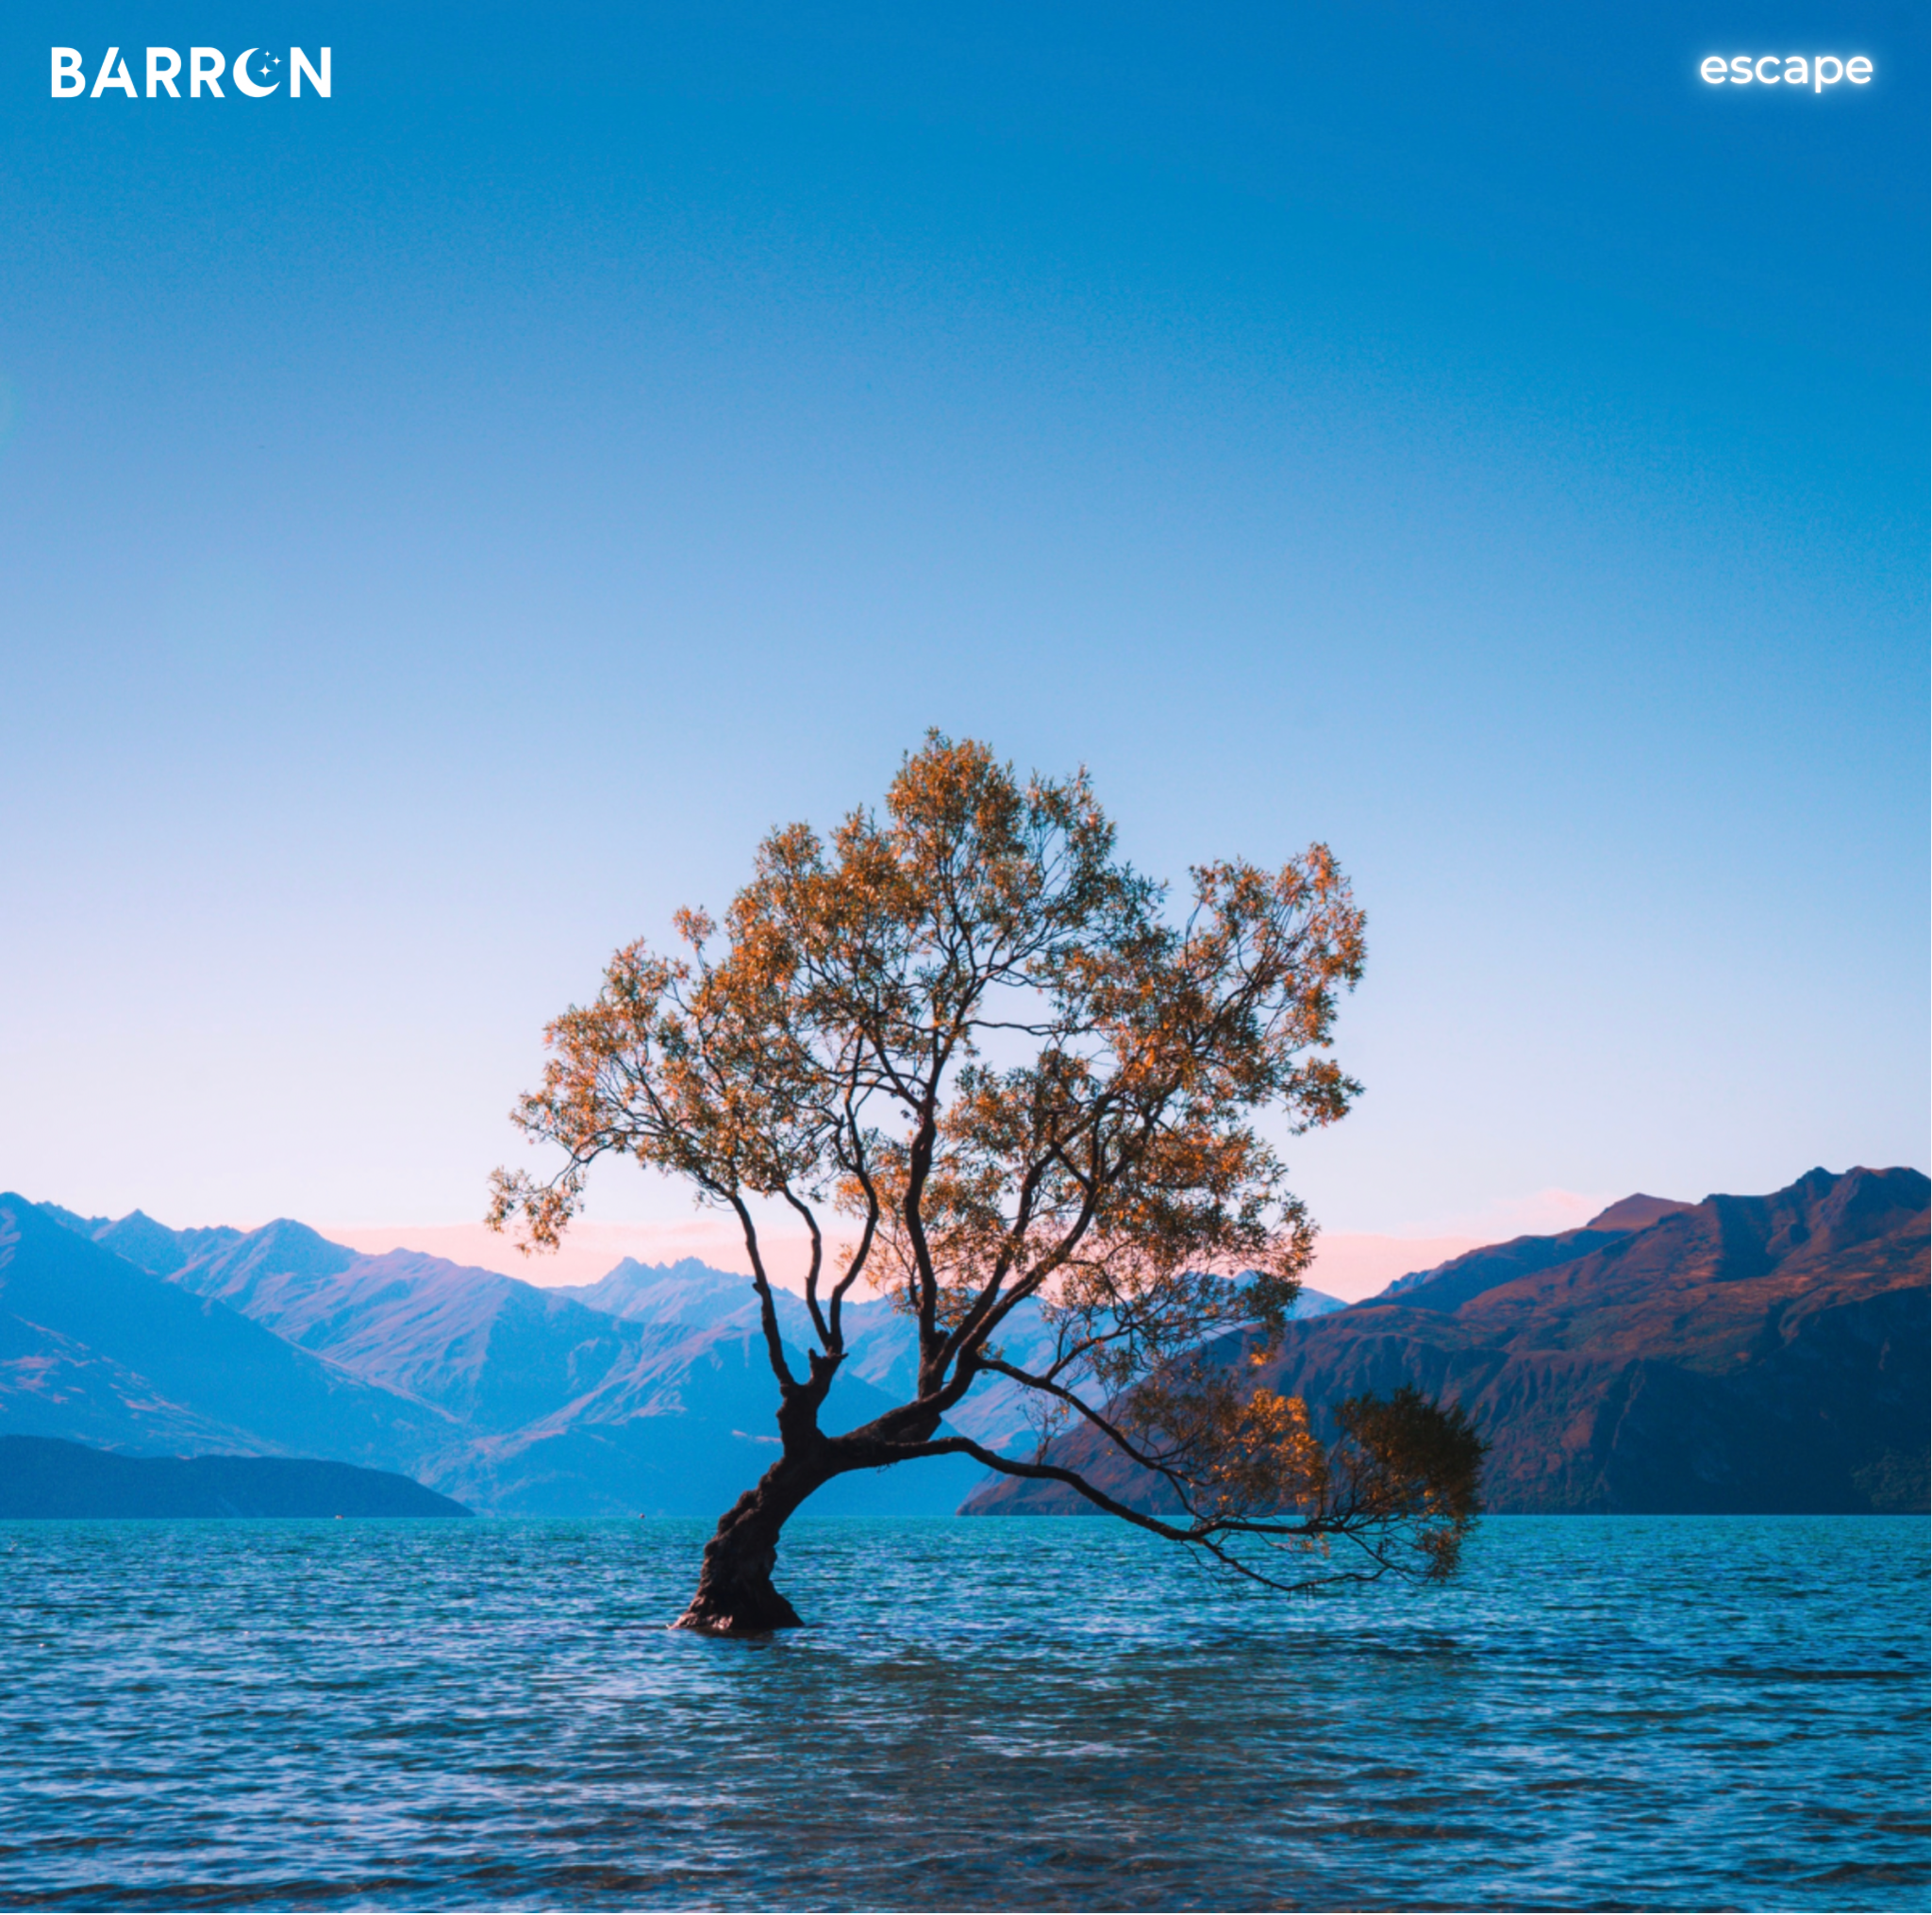 BARRON Releases Introverted, Hopeful Single In ‘Escape’